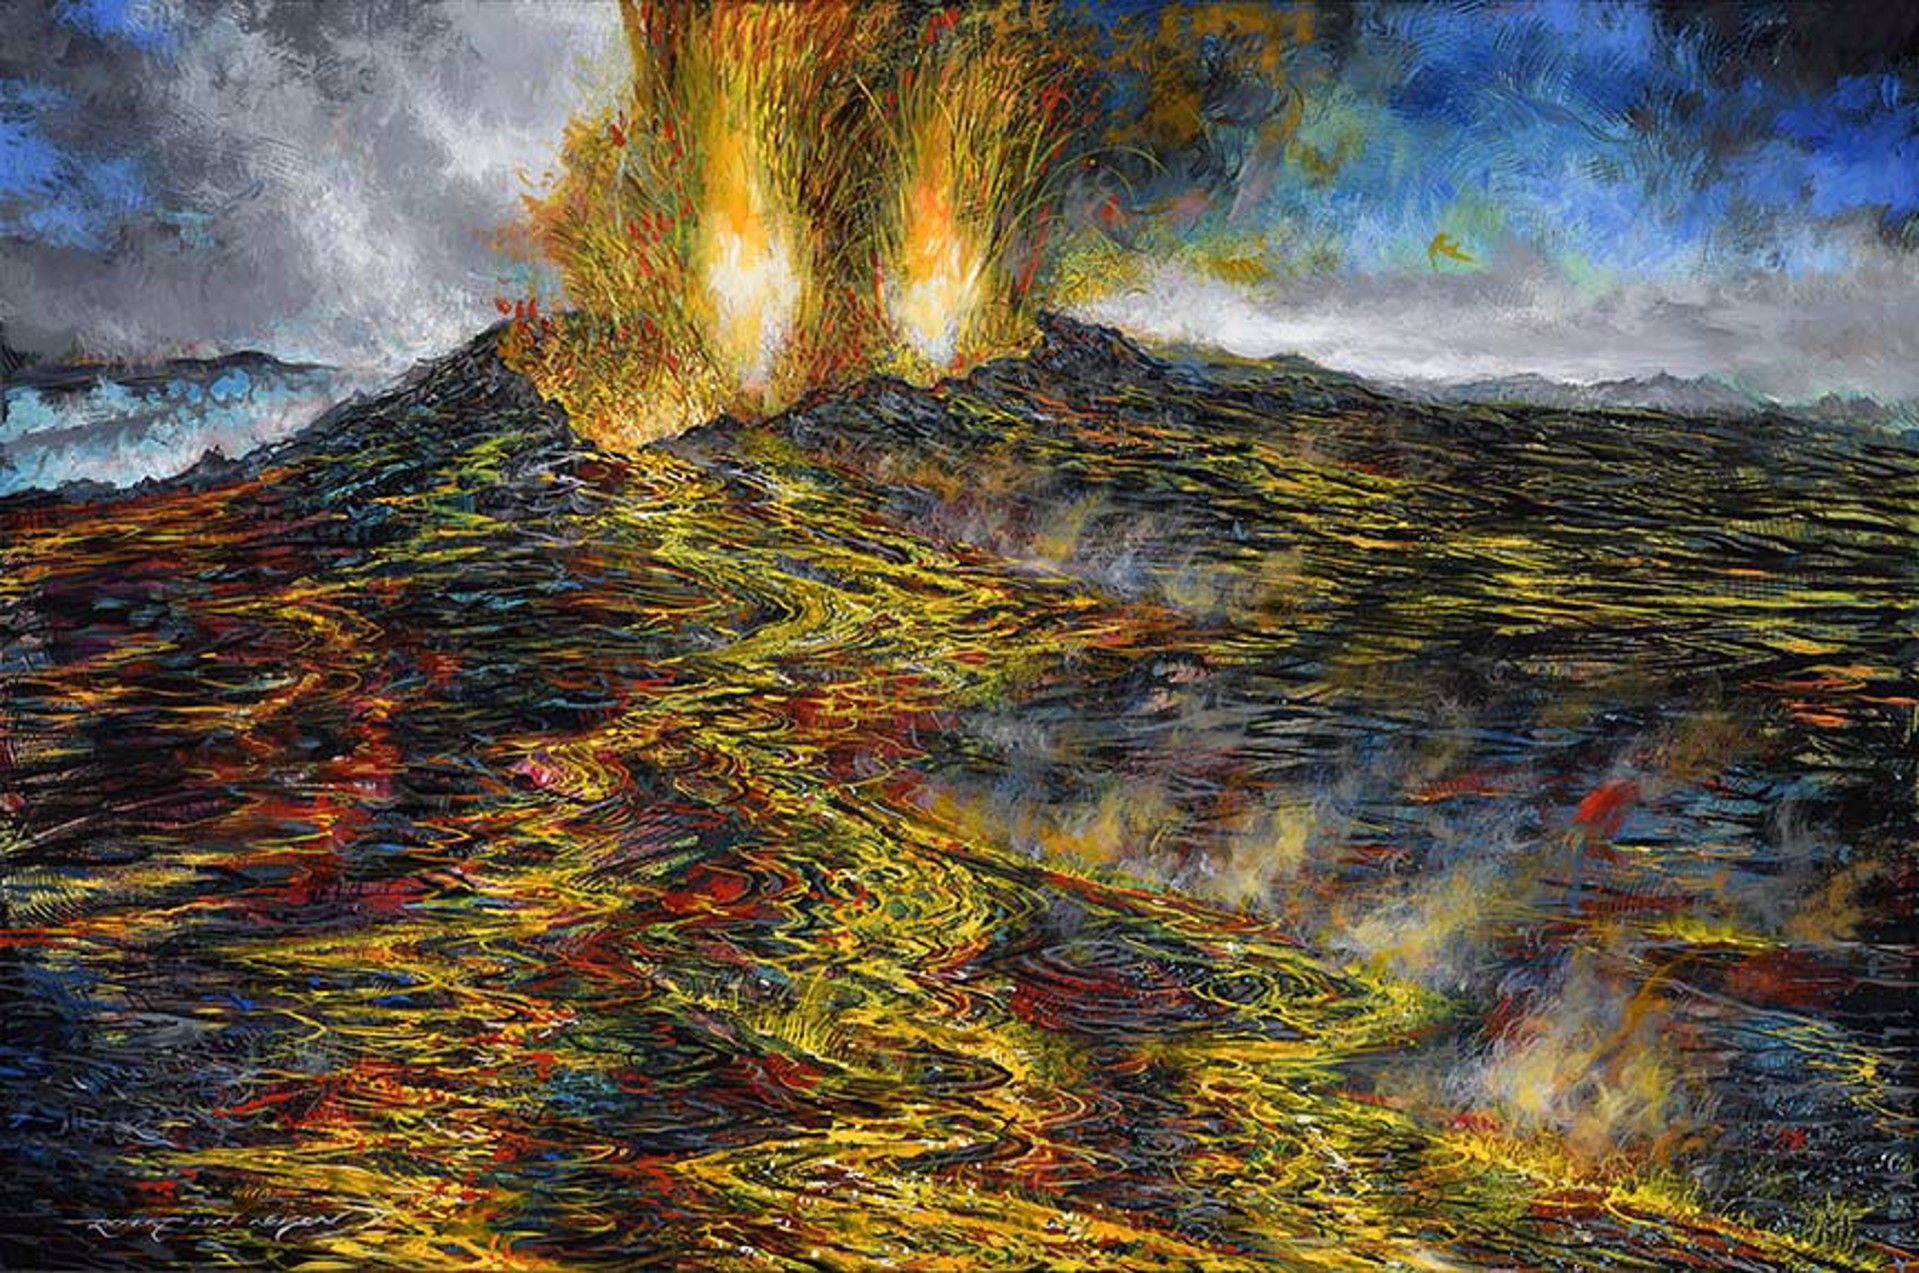 May Eruption by Robert Lyn Nelson